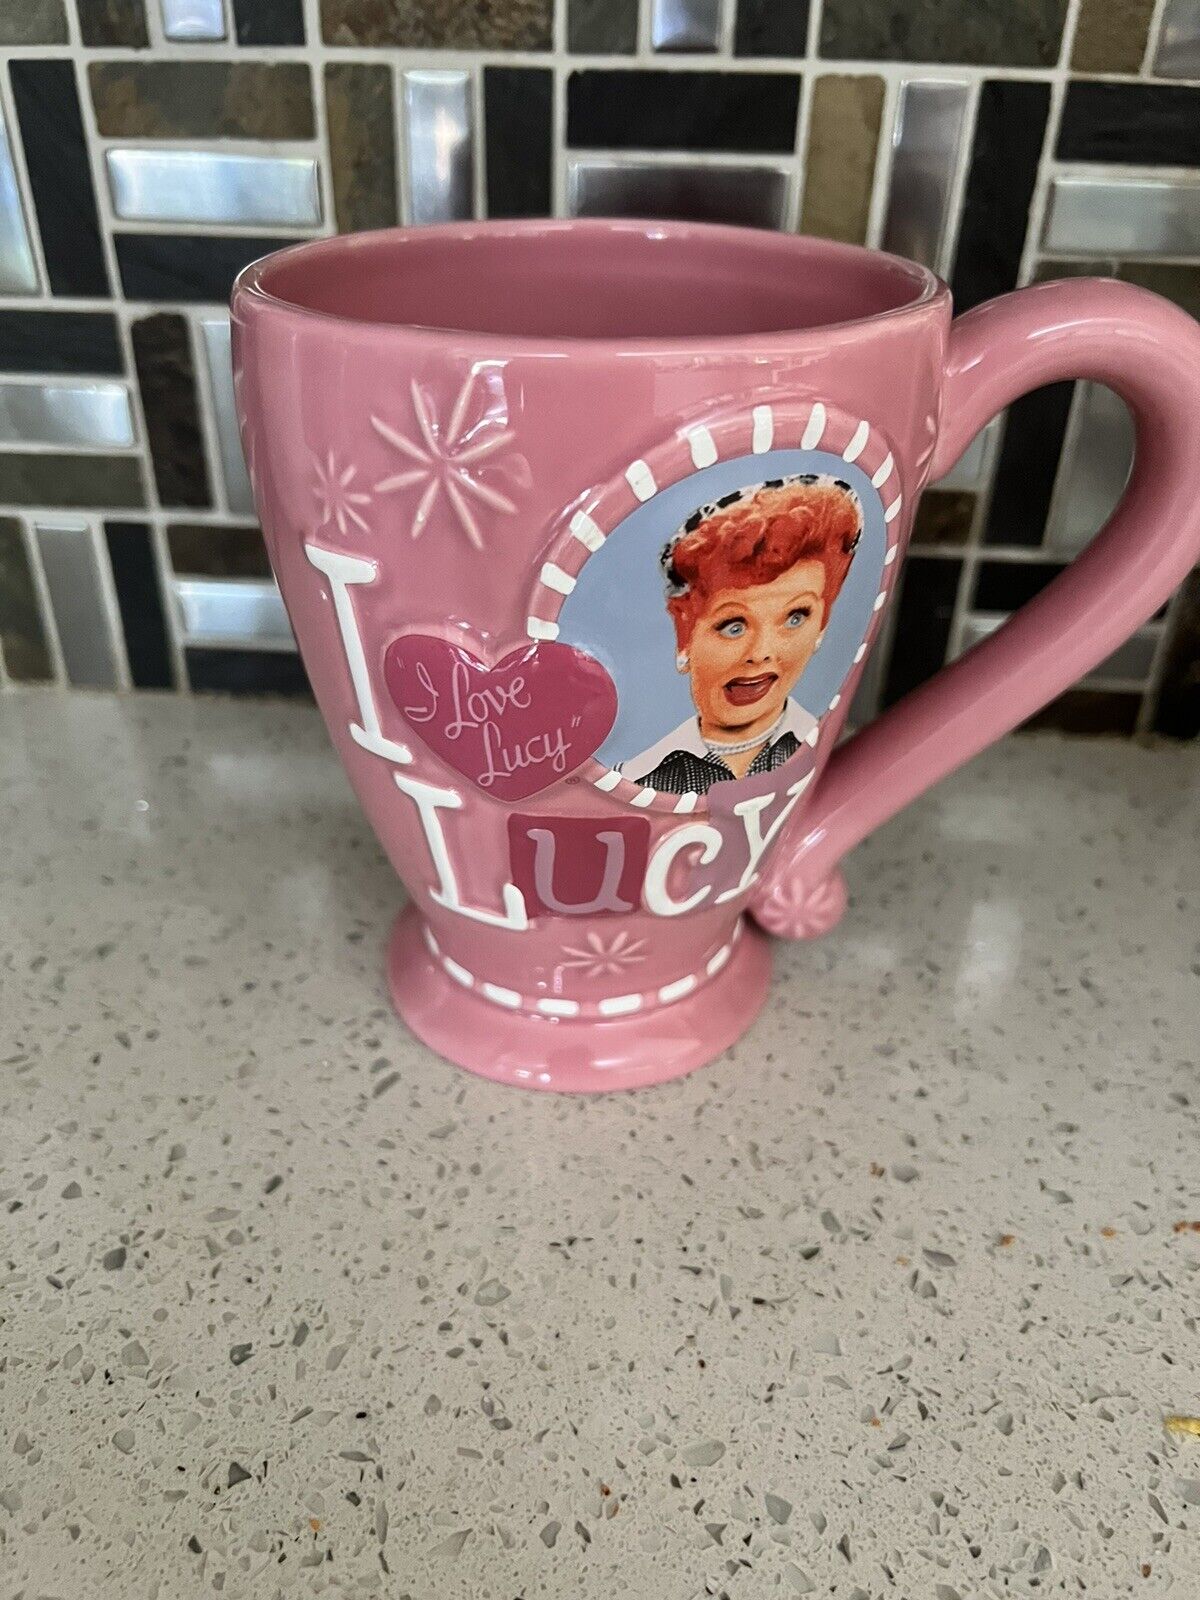 Collector Vandor I Love Lucy Sculpted Ceramic Mug, It\'s so tasty, Pink, 18-Ounce